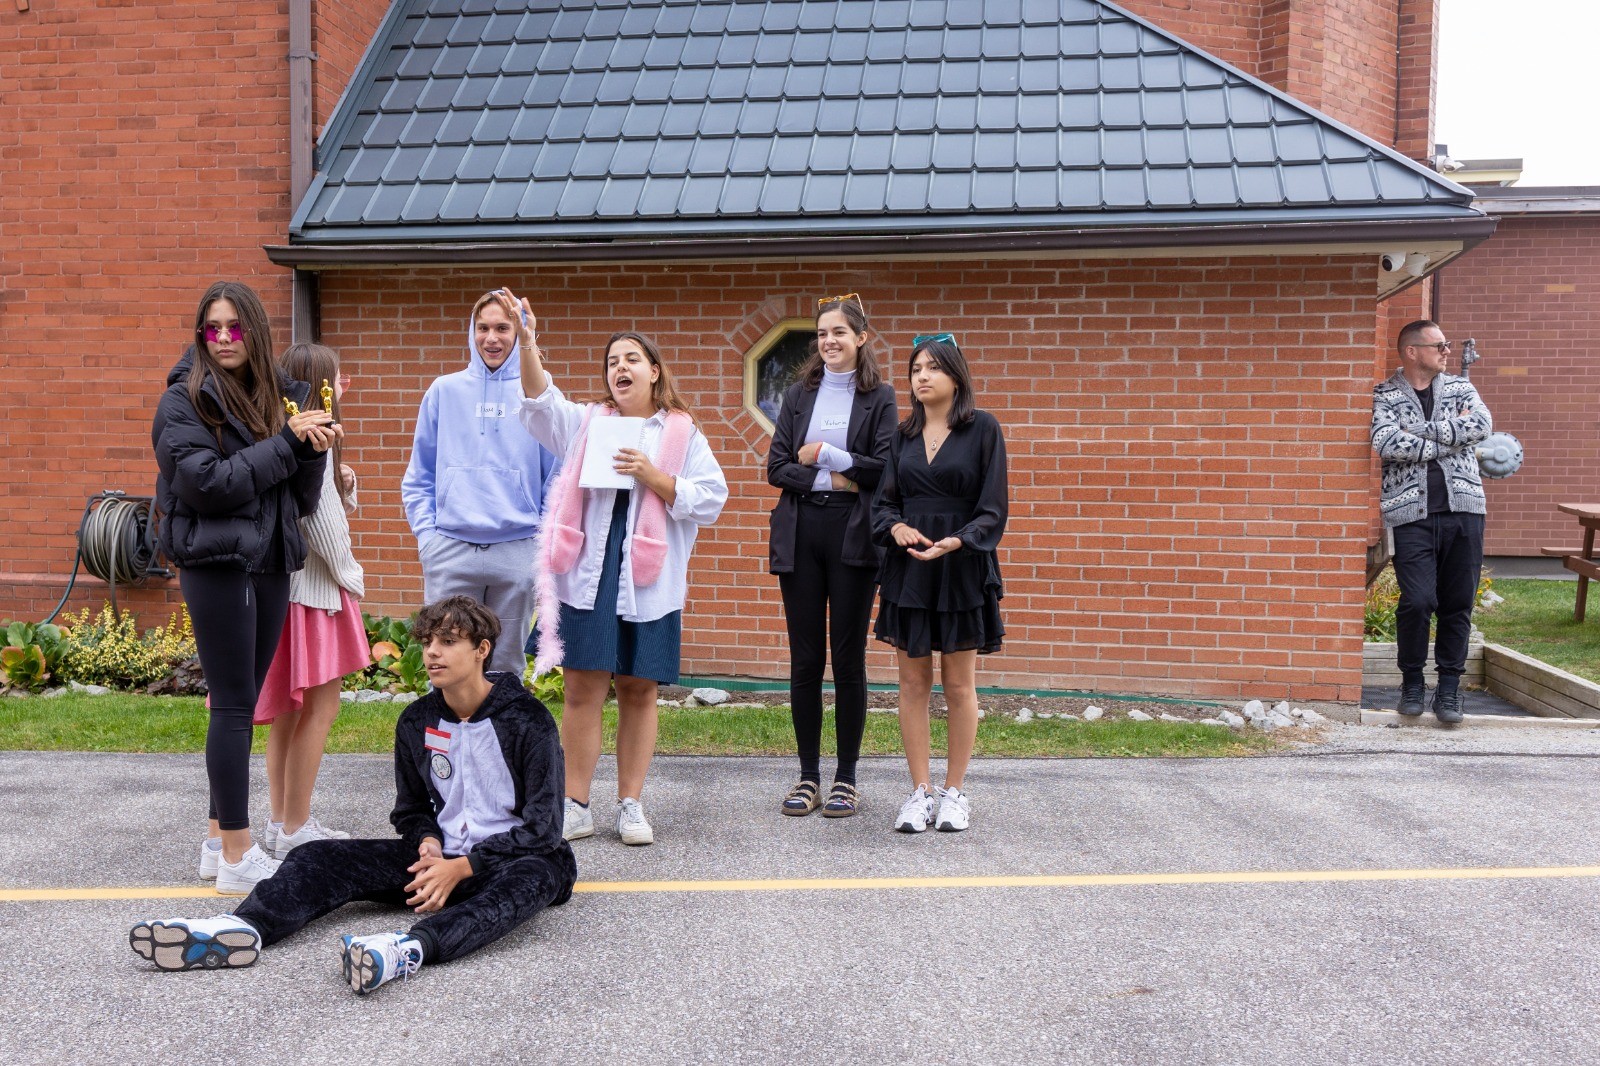 A group of teens standing outside a red brick church